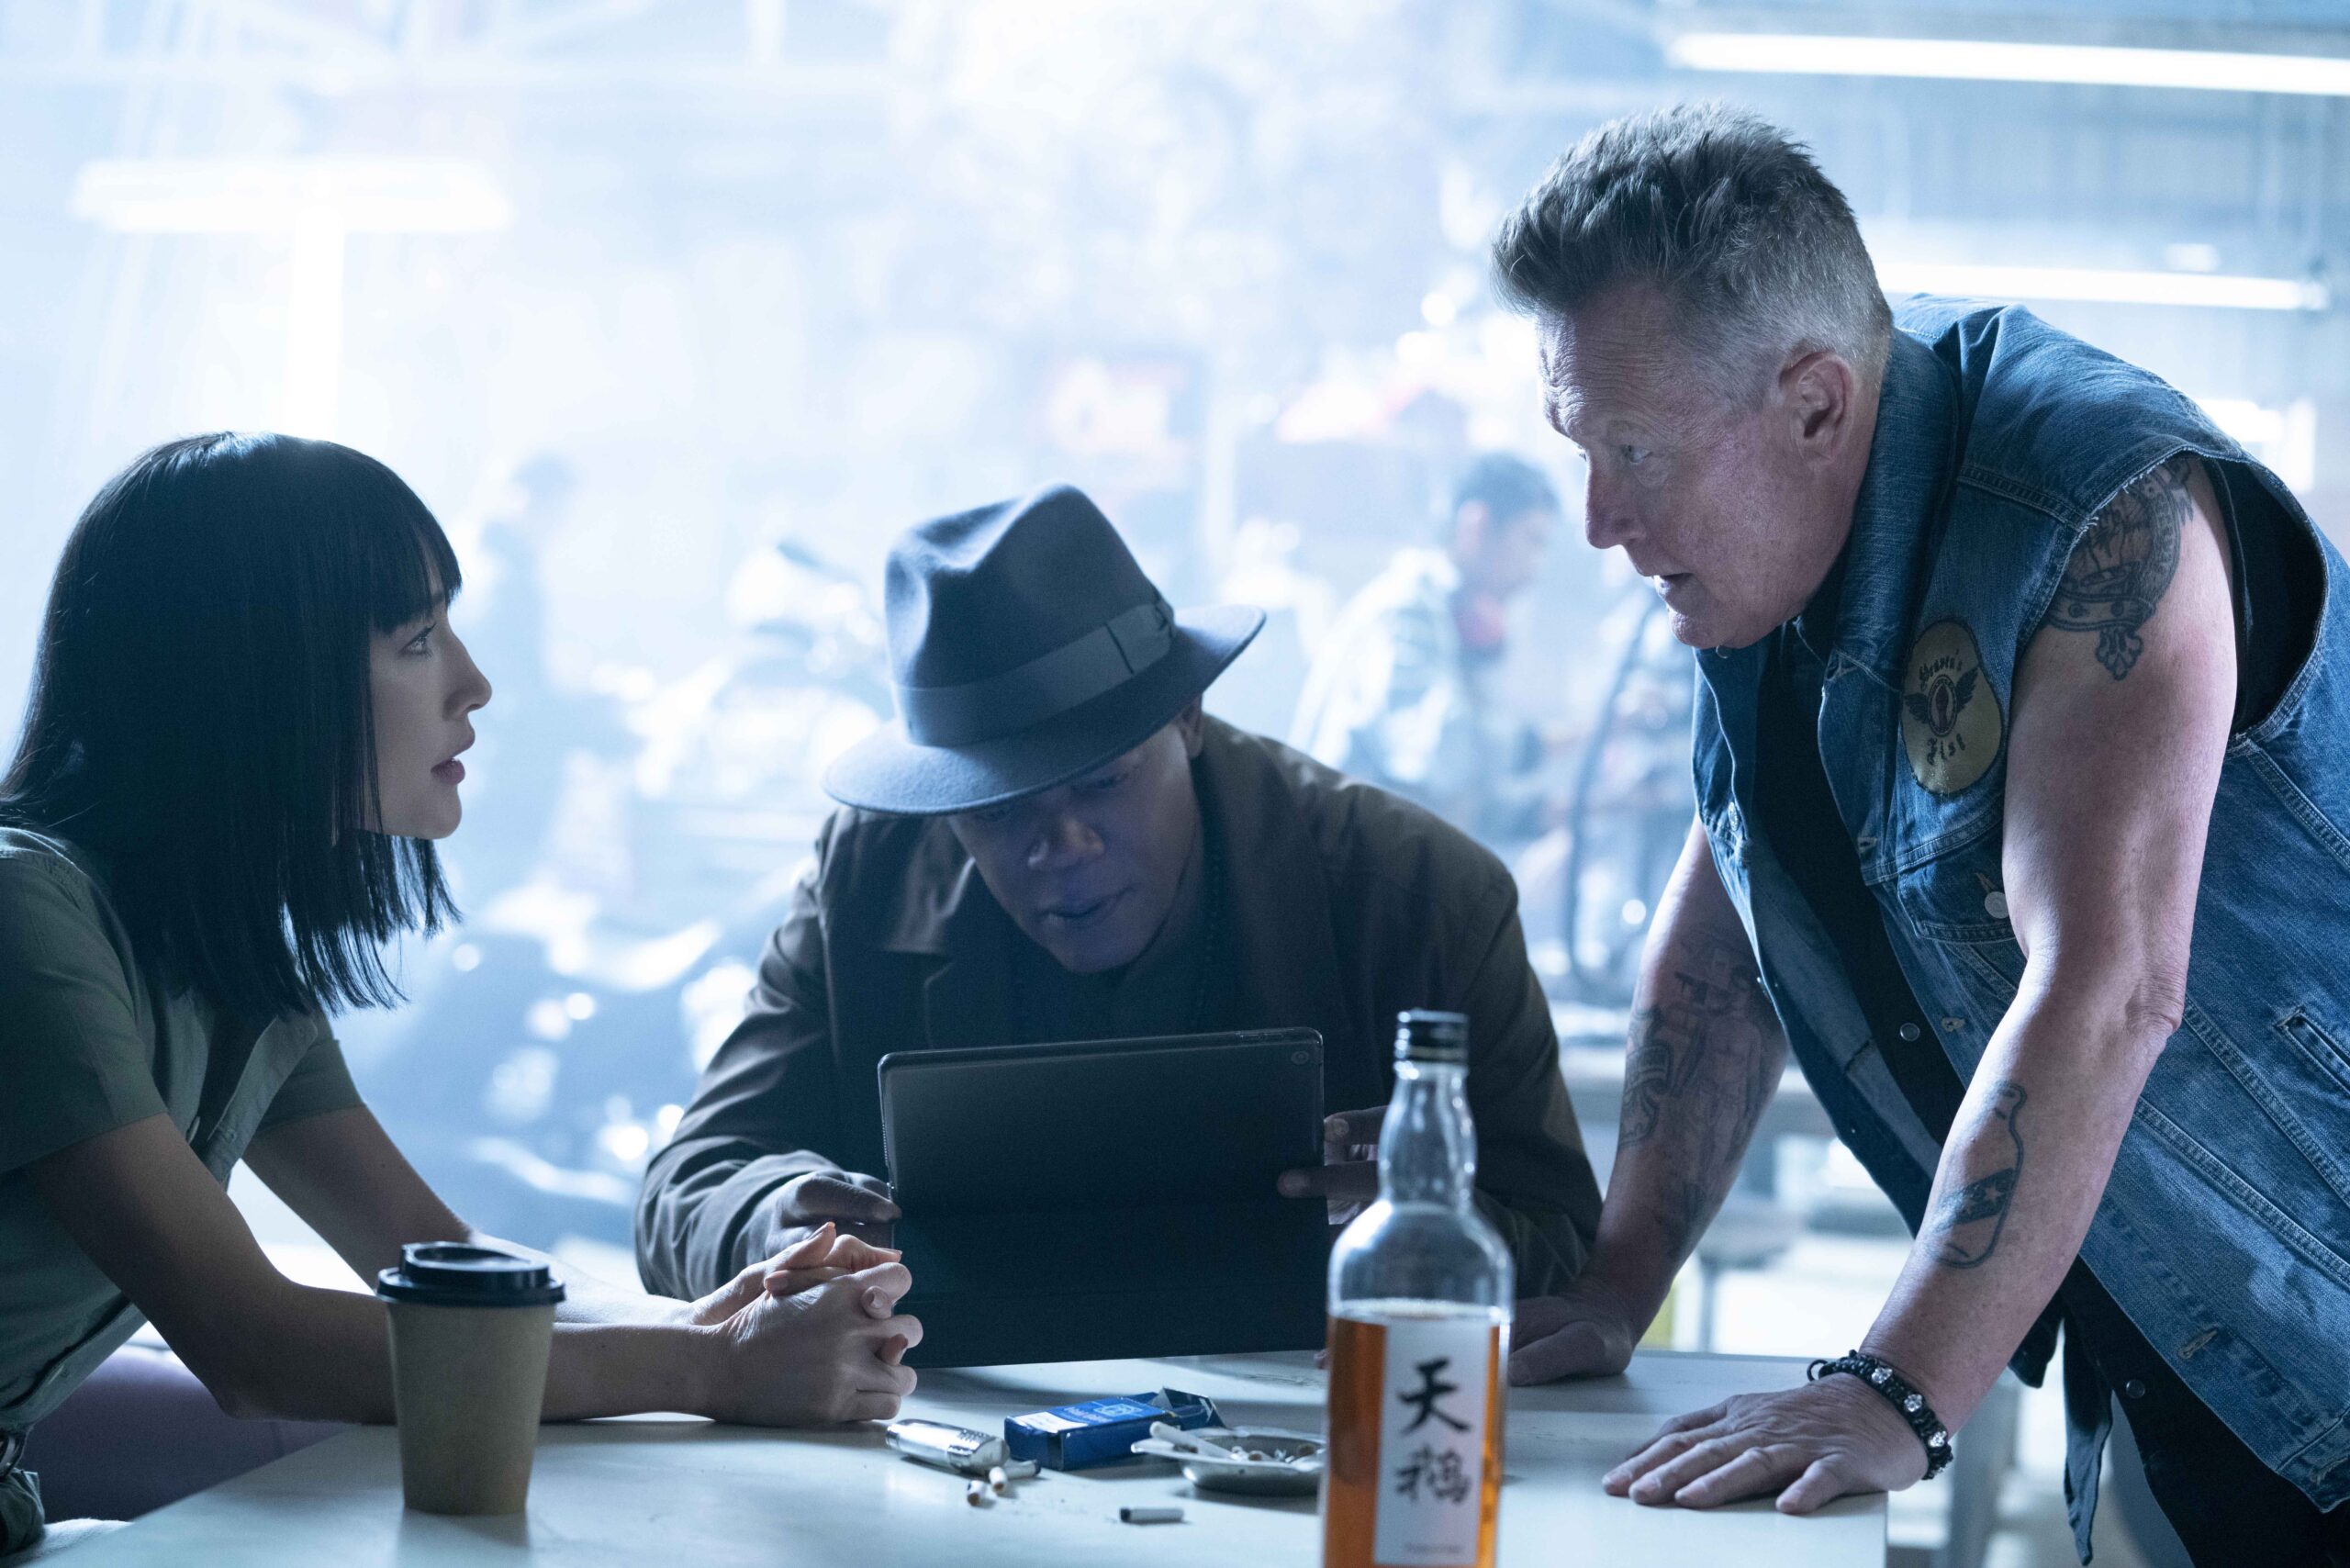 Maggie Q as Anna, Samuel L. Jackson as Moody, and Robert Patrick as Billy Boy in The Protégé.